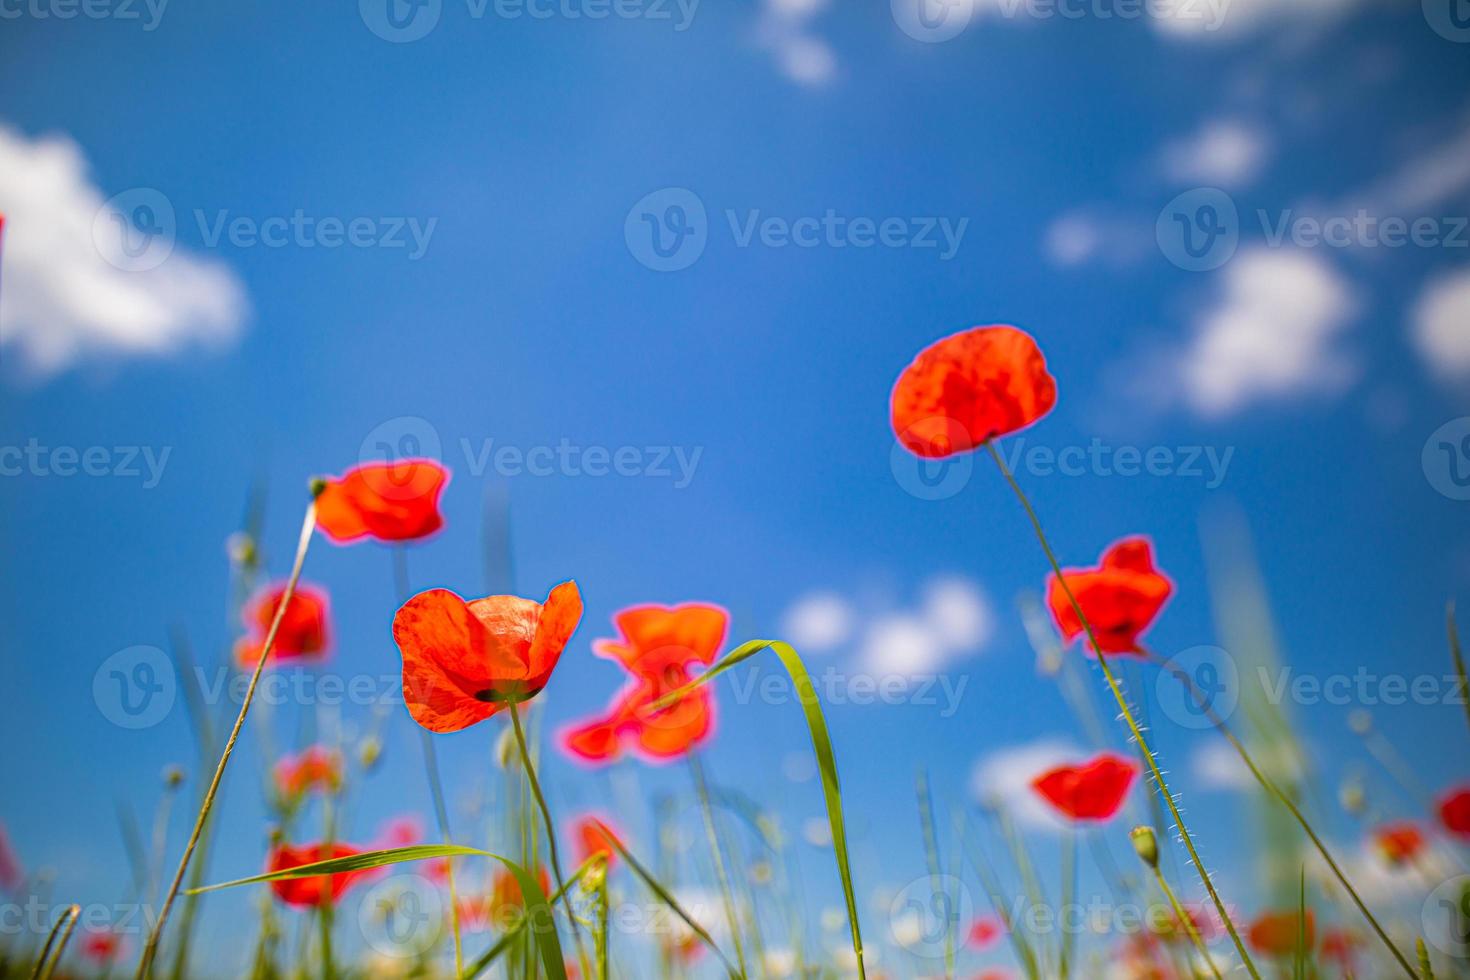 Red poppy flowers on sunny blue sky, poppies spring blossom, green meadow with flowers. Seasonal springtime landscape, relaxing nature closeup photo